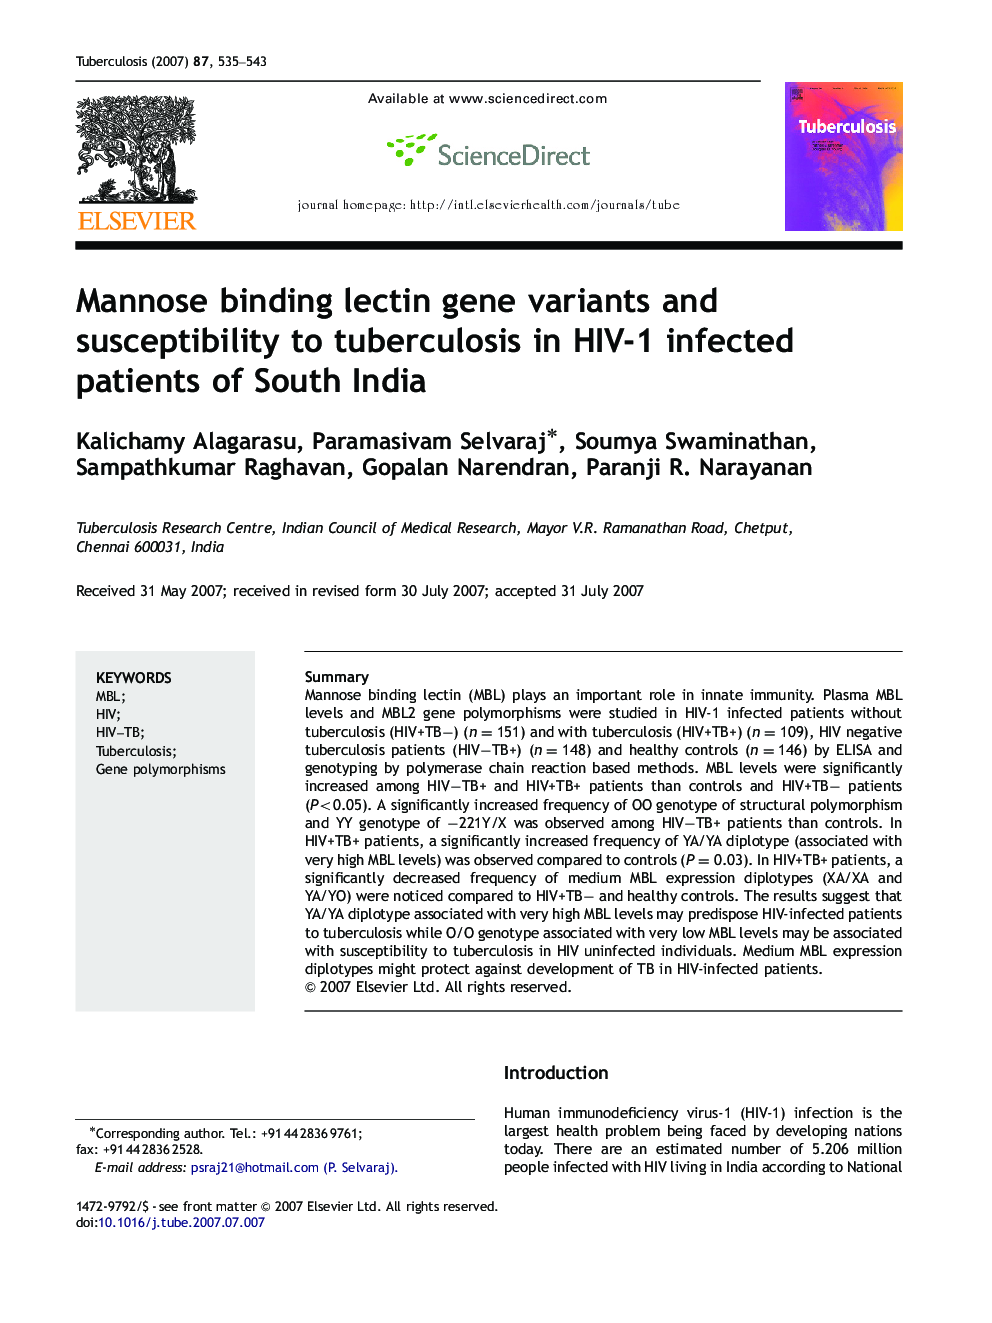 Mannose binding lectin gene variants and susceptibility to tuberculosis in HIV-1 infected patients of South India